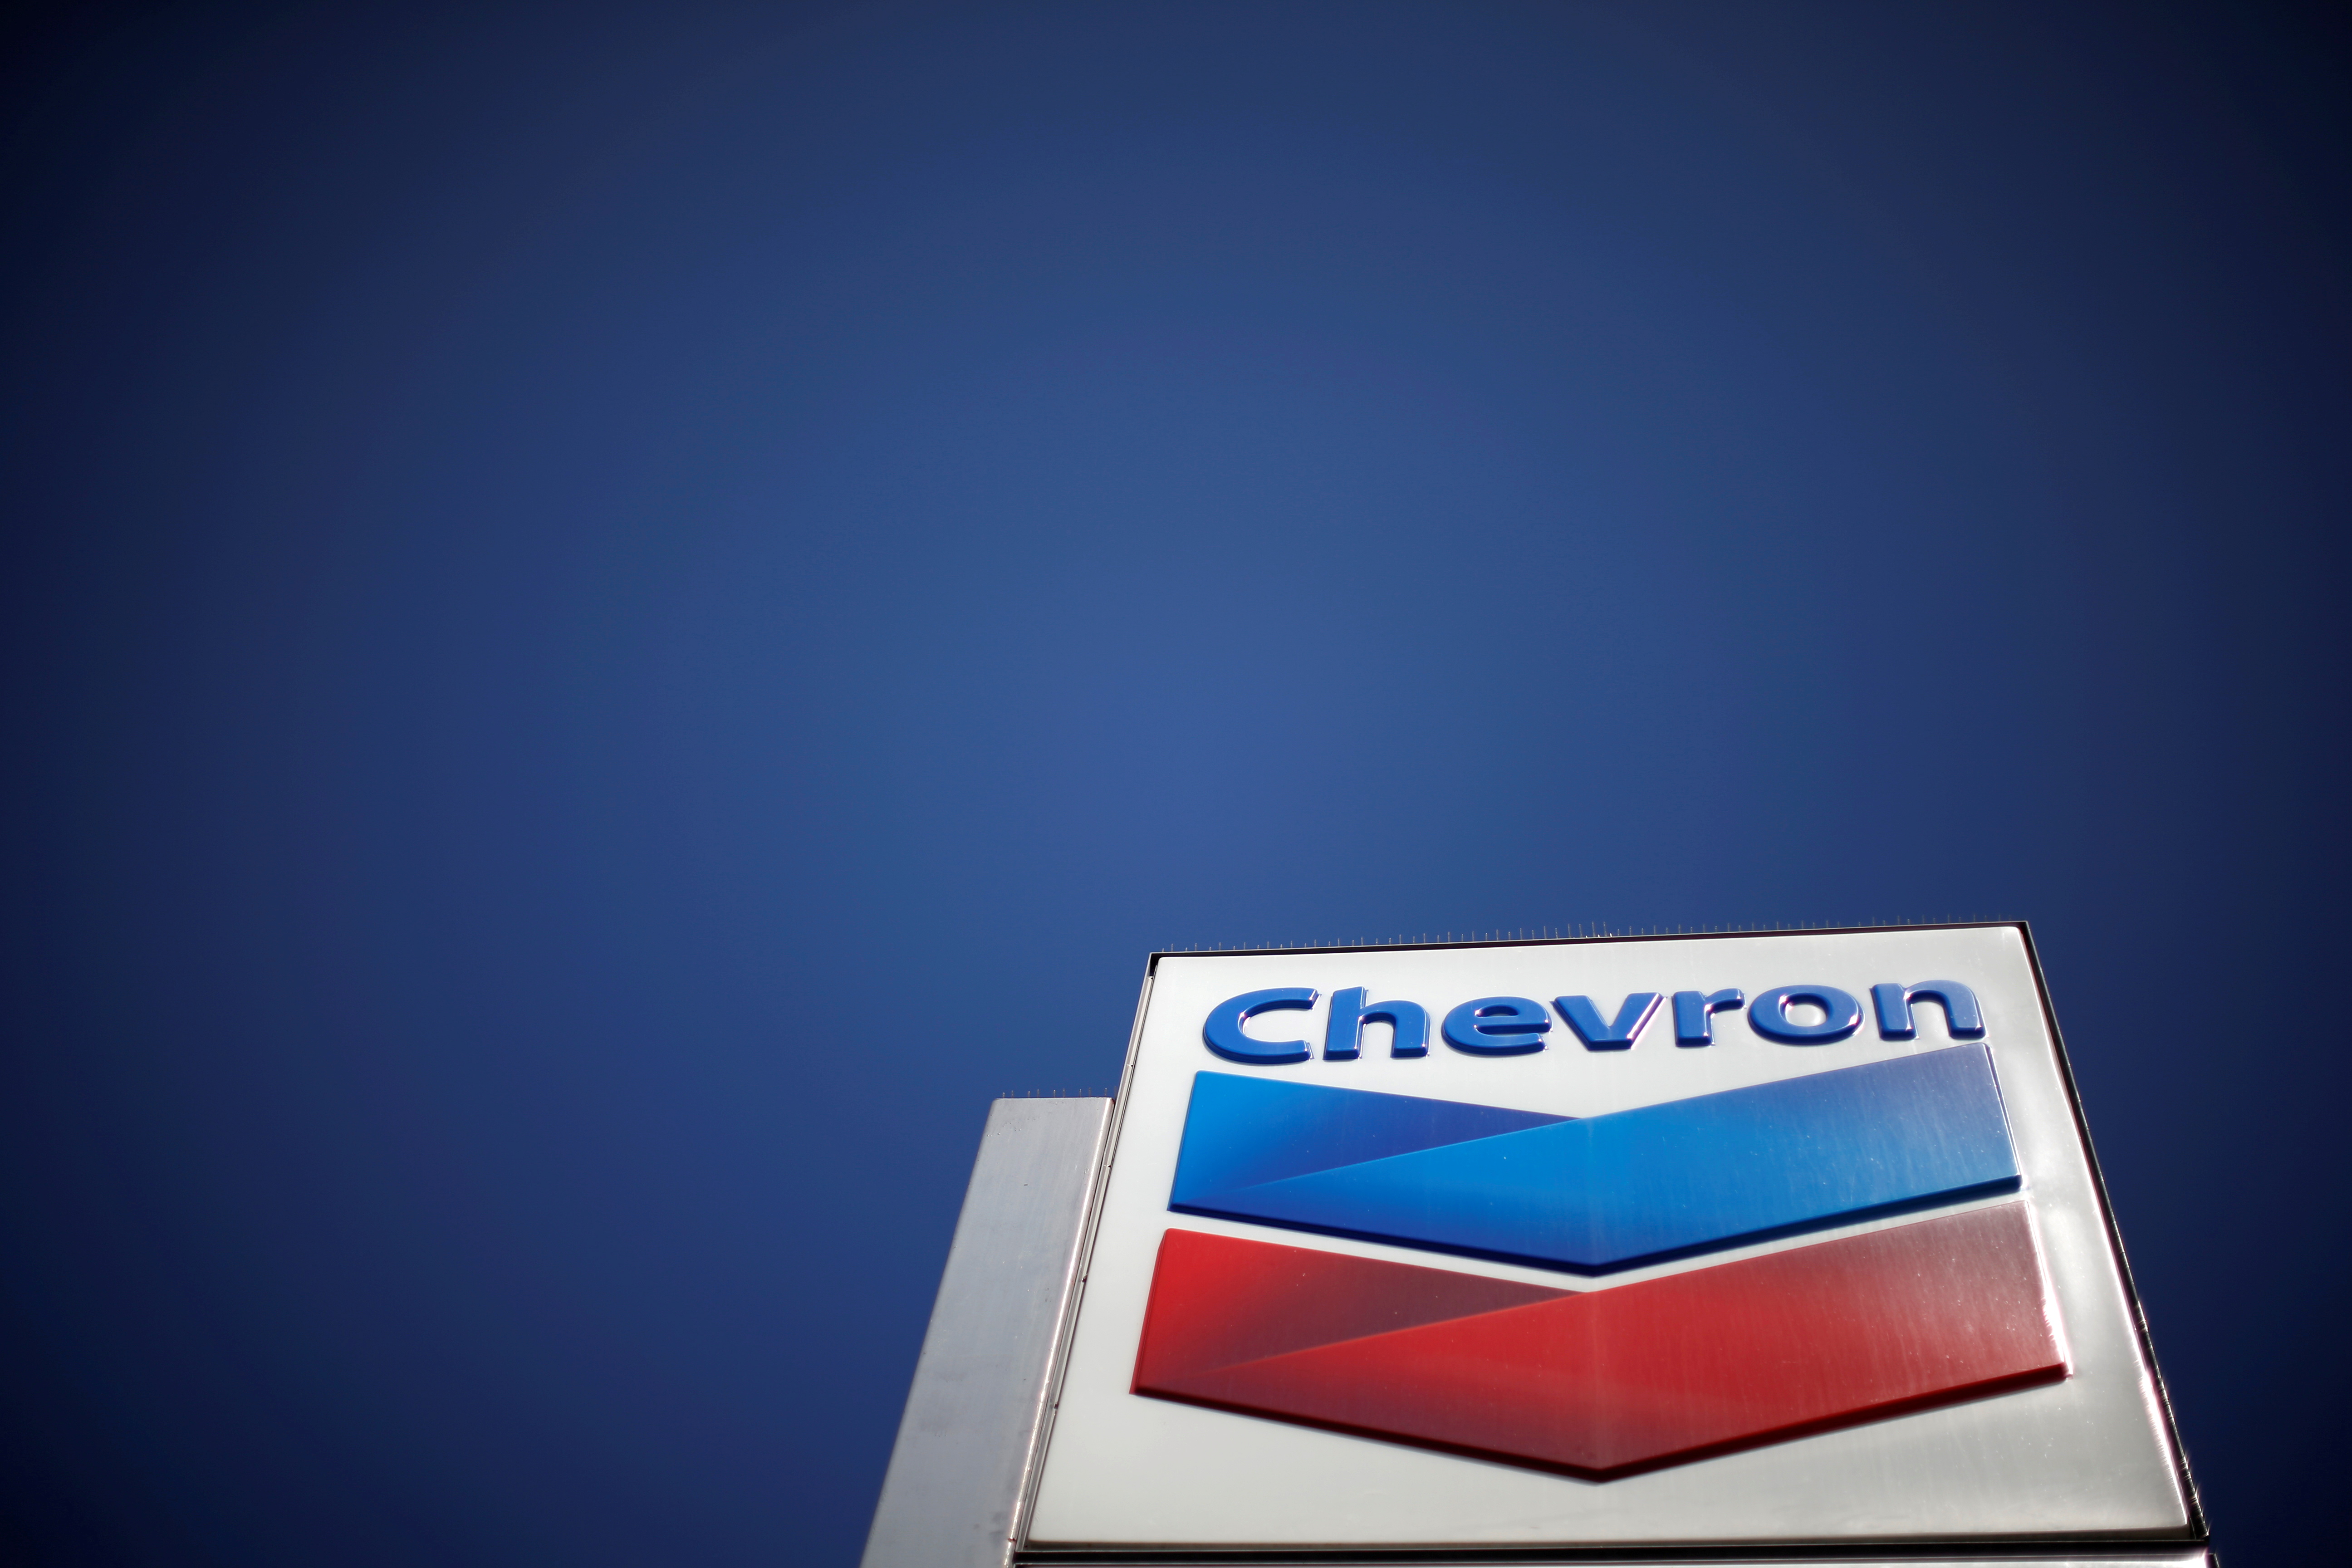 The logo of Chevron is seen in Los Angeles